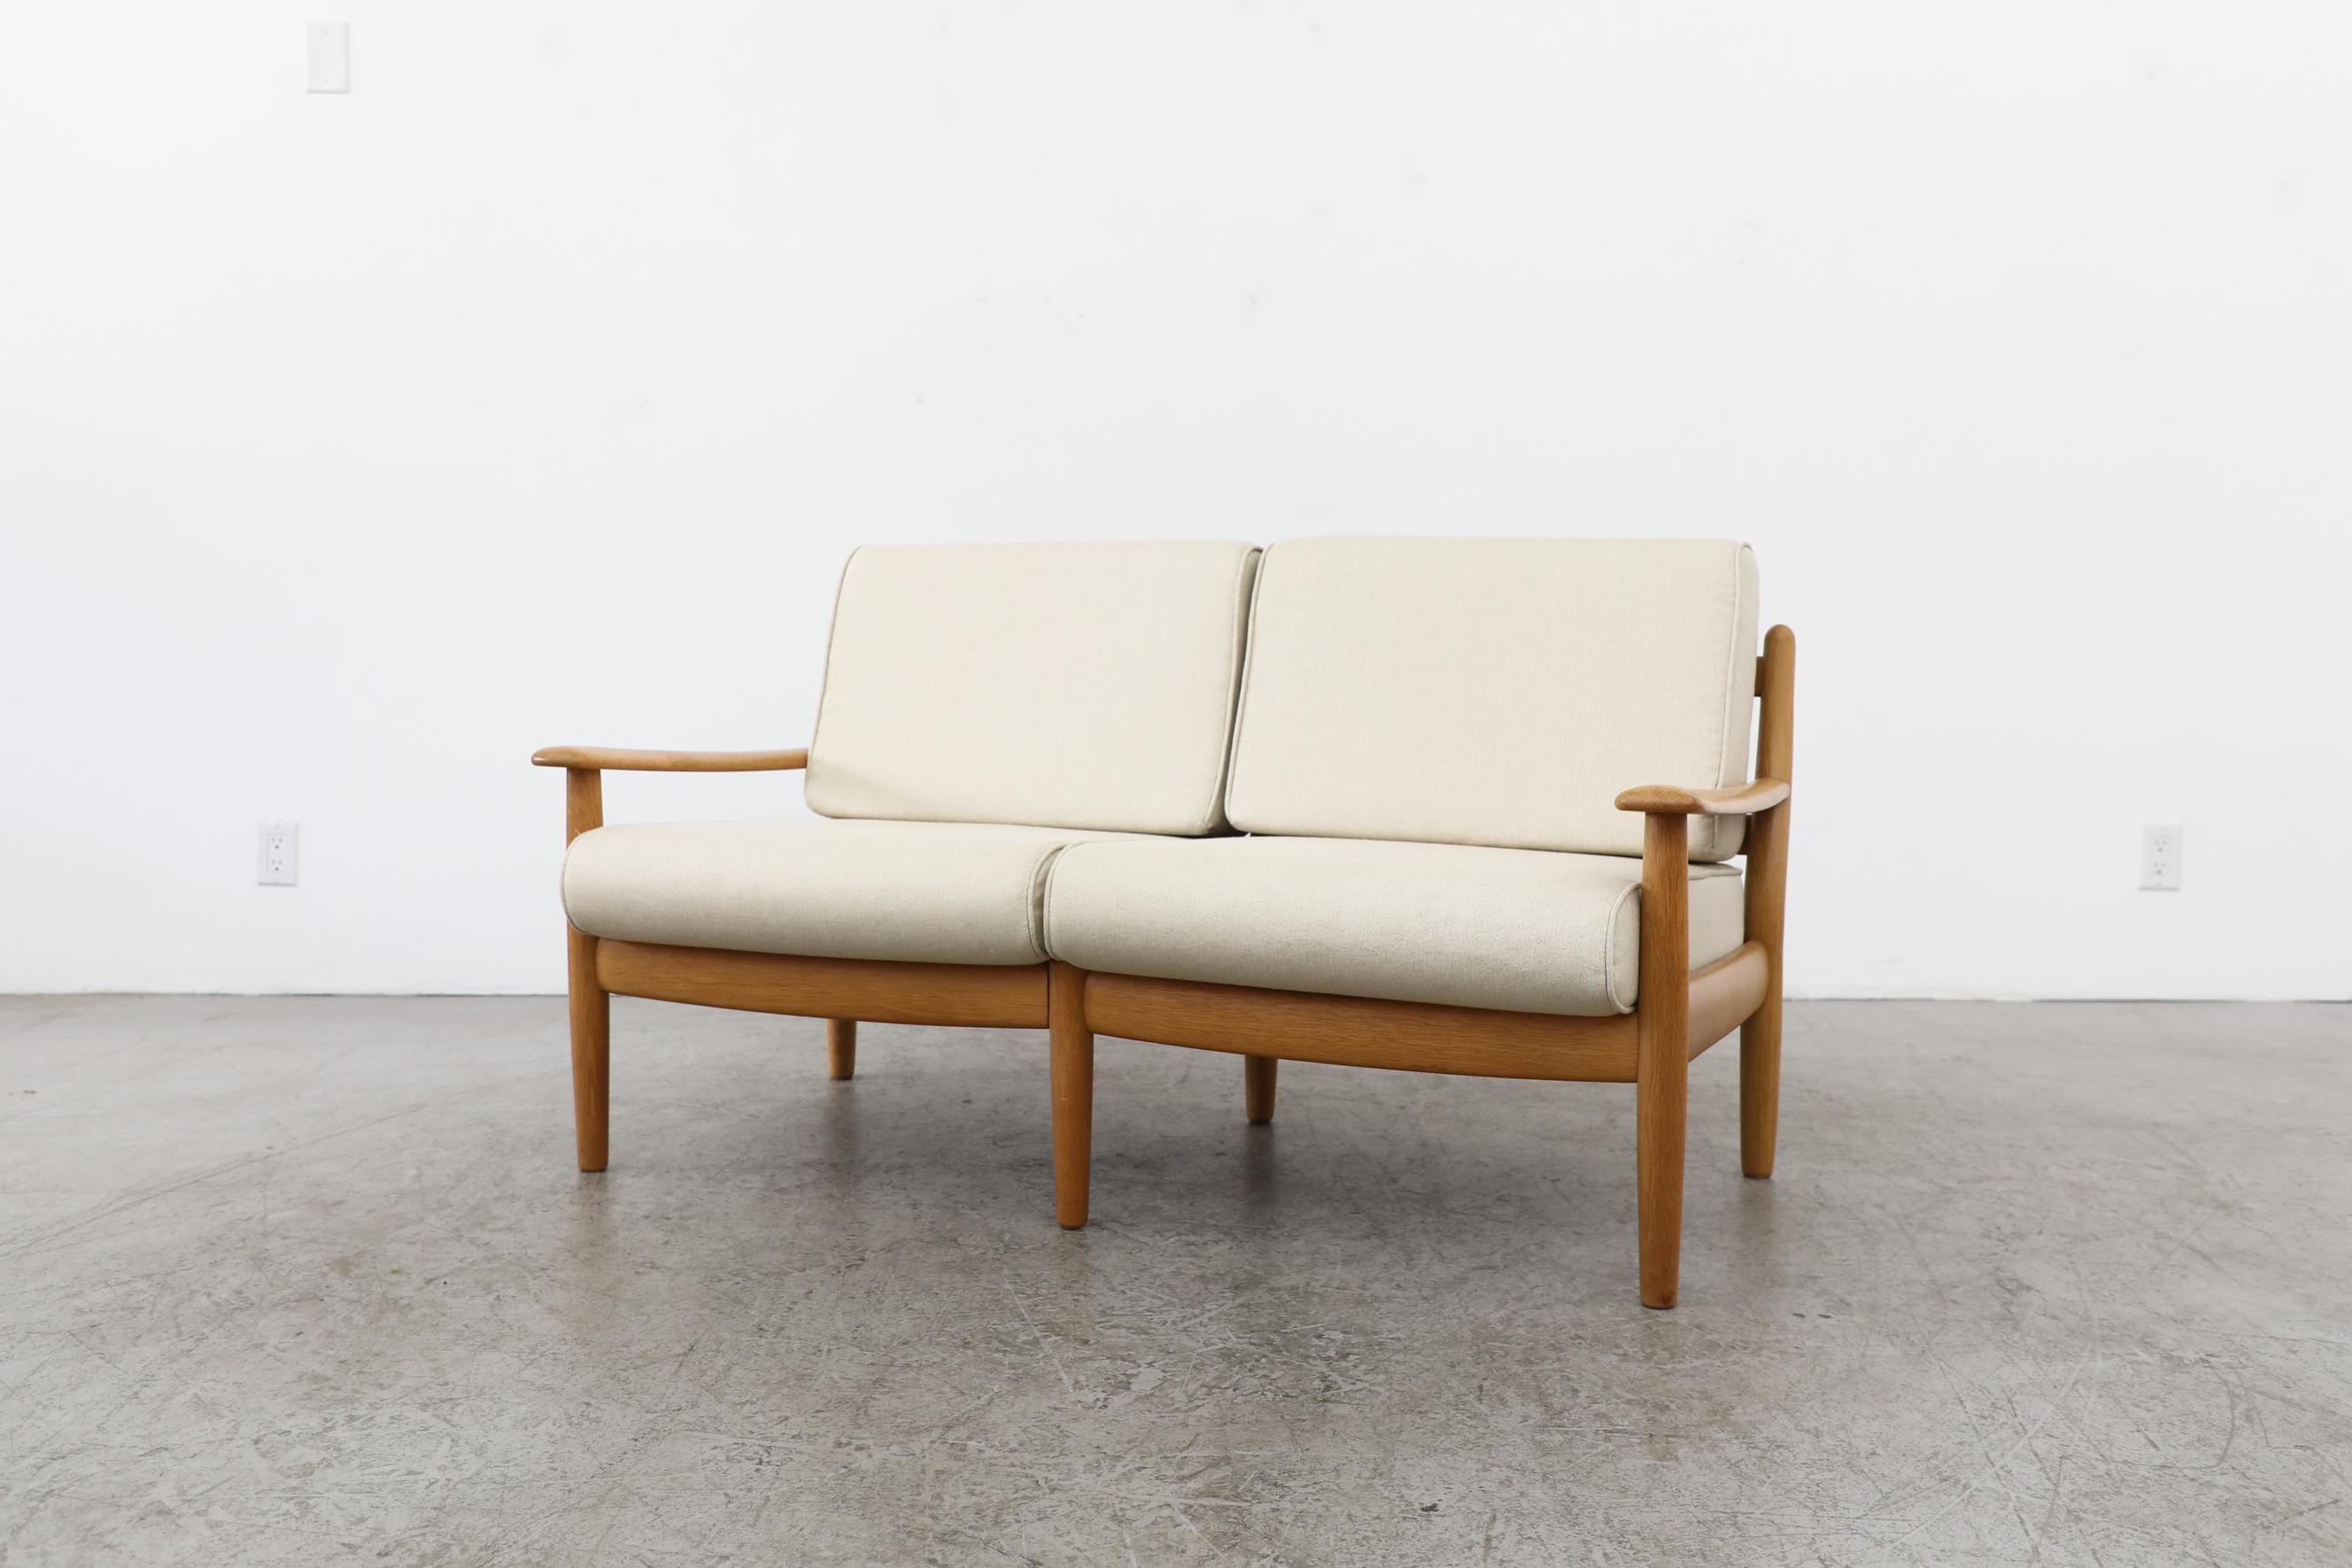 Upholstery Wilhelm Knoll Oak Loveseat with Rounded Edges & Cream Cushions, Germany, 1960's For Sale